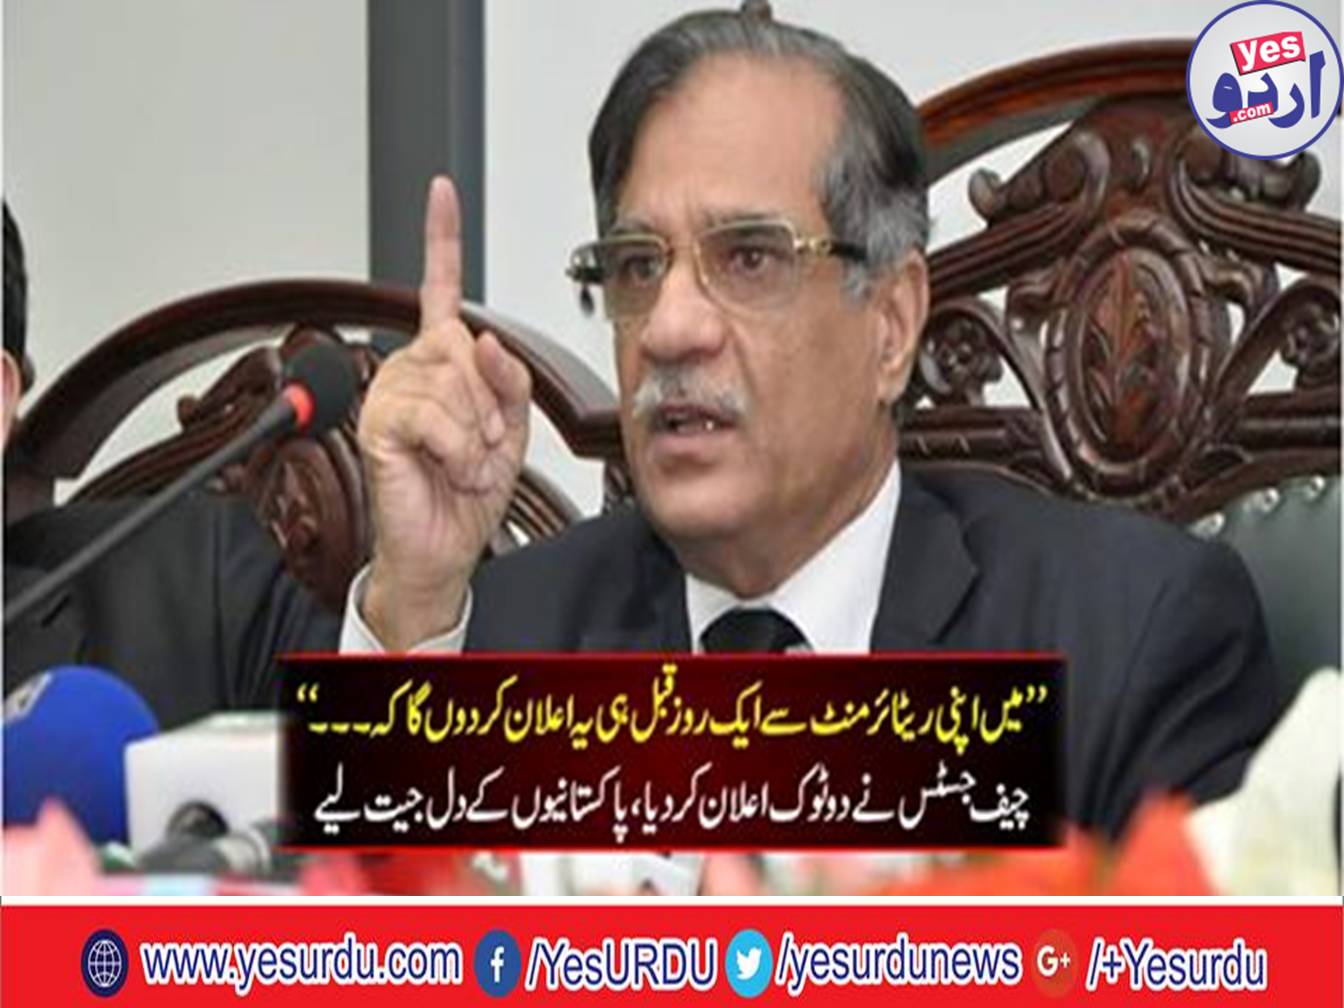 After the retirement, I will not accept any position, the announcement of the Chief Justice of Pakistan